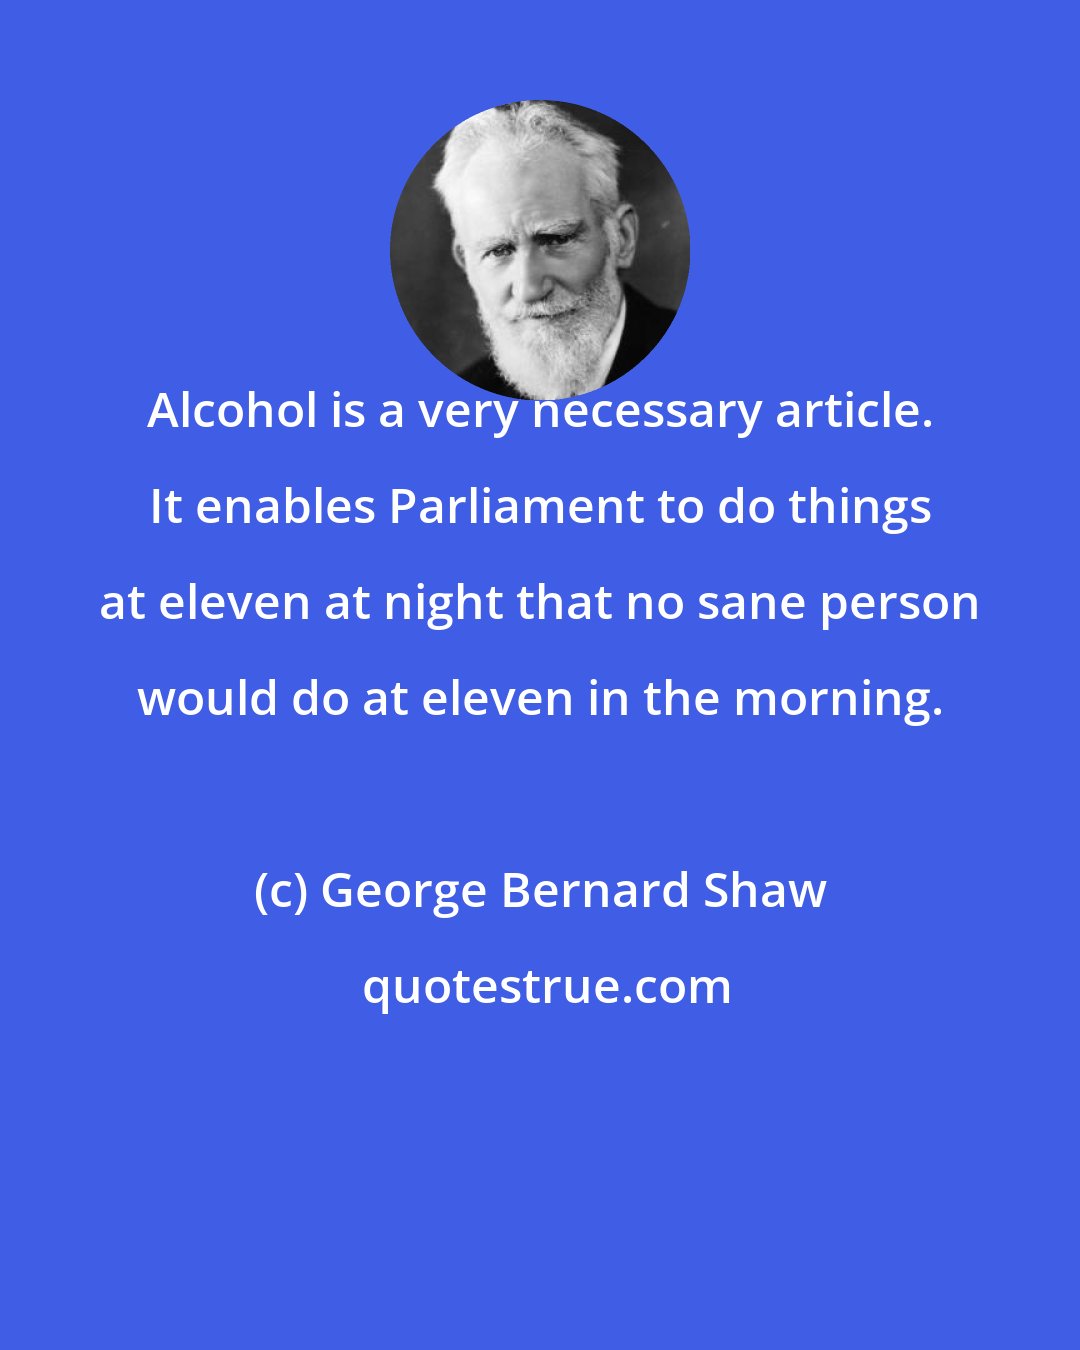 George Bernard Shaw: Alcohol is a very necessary article. It enables Parliament to do things at eleven at night that no sane person would do at eleven in the morning.